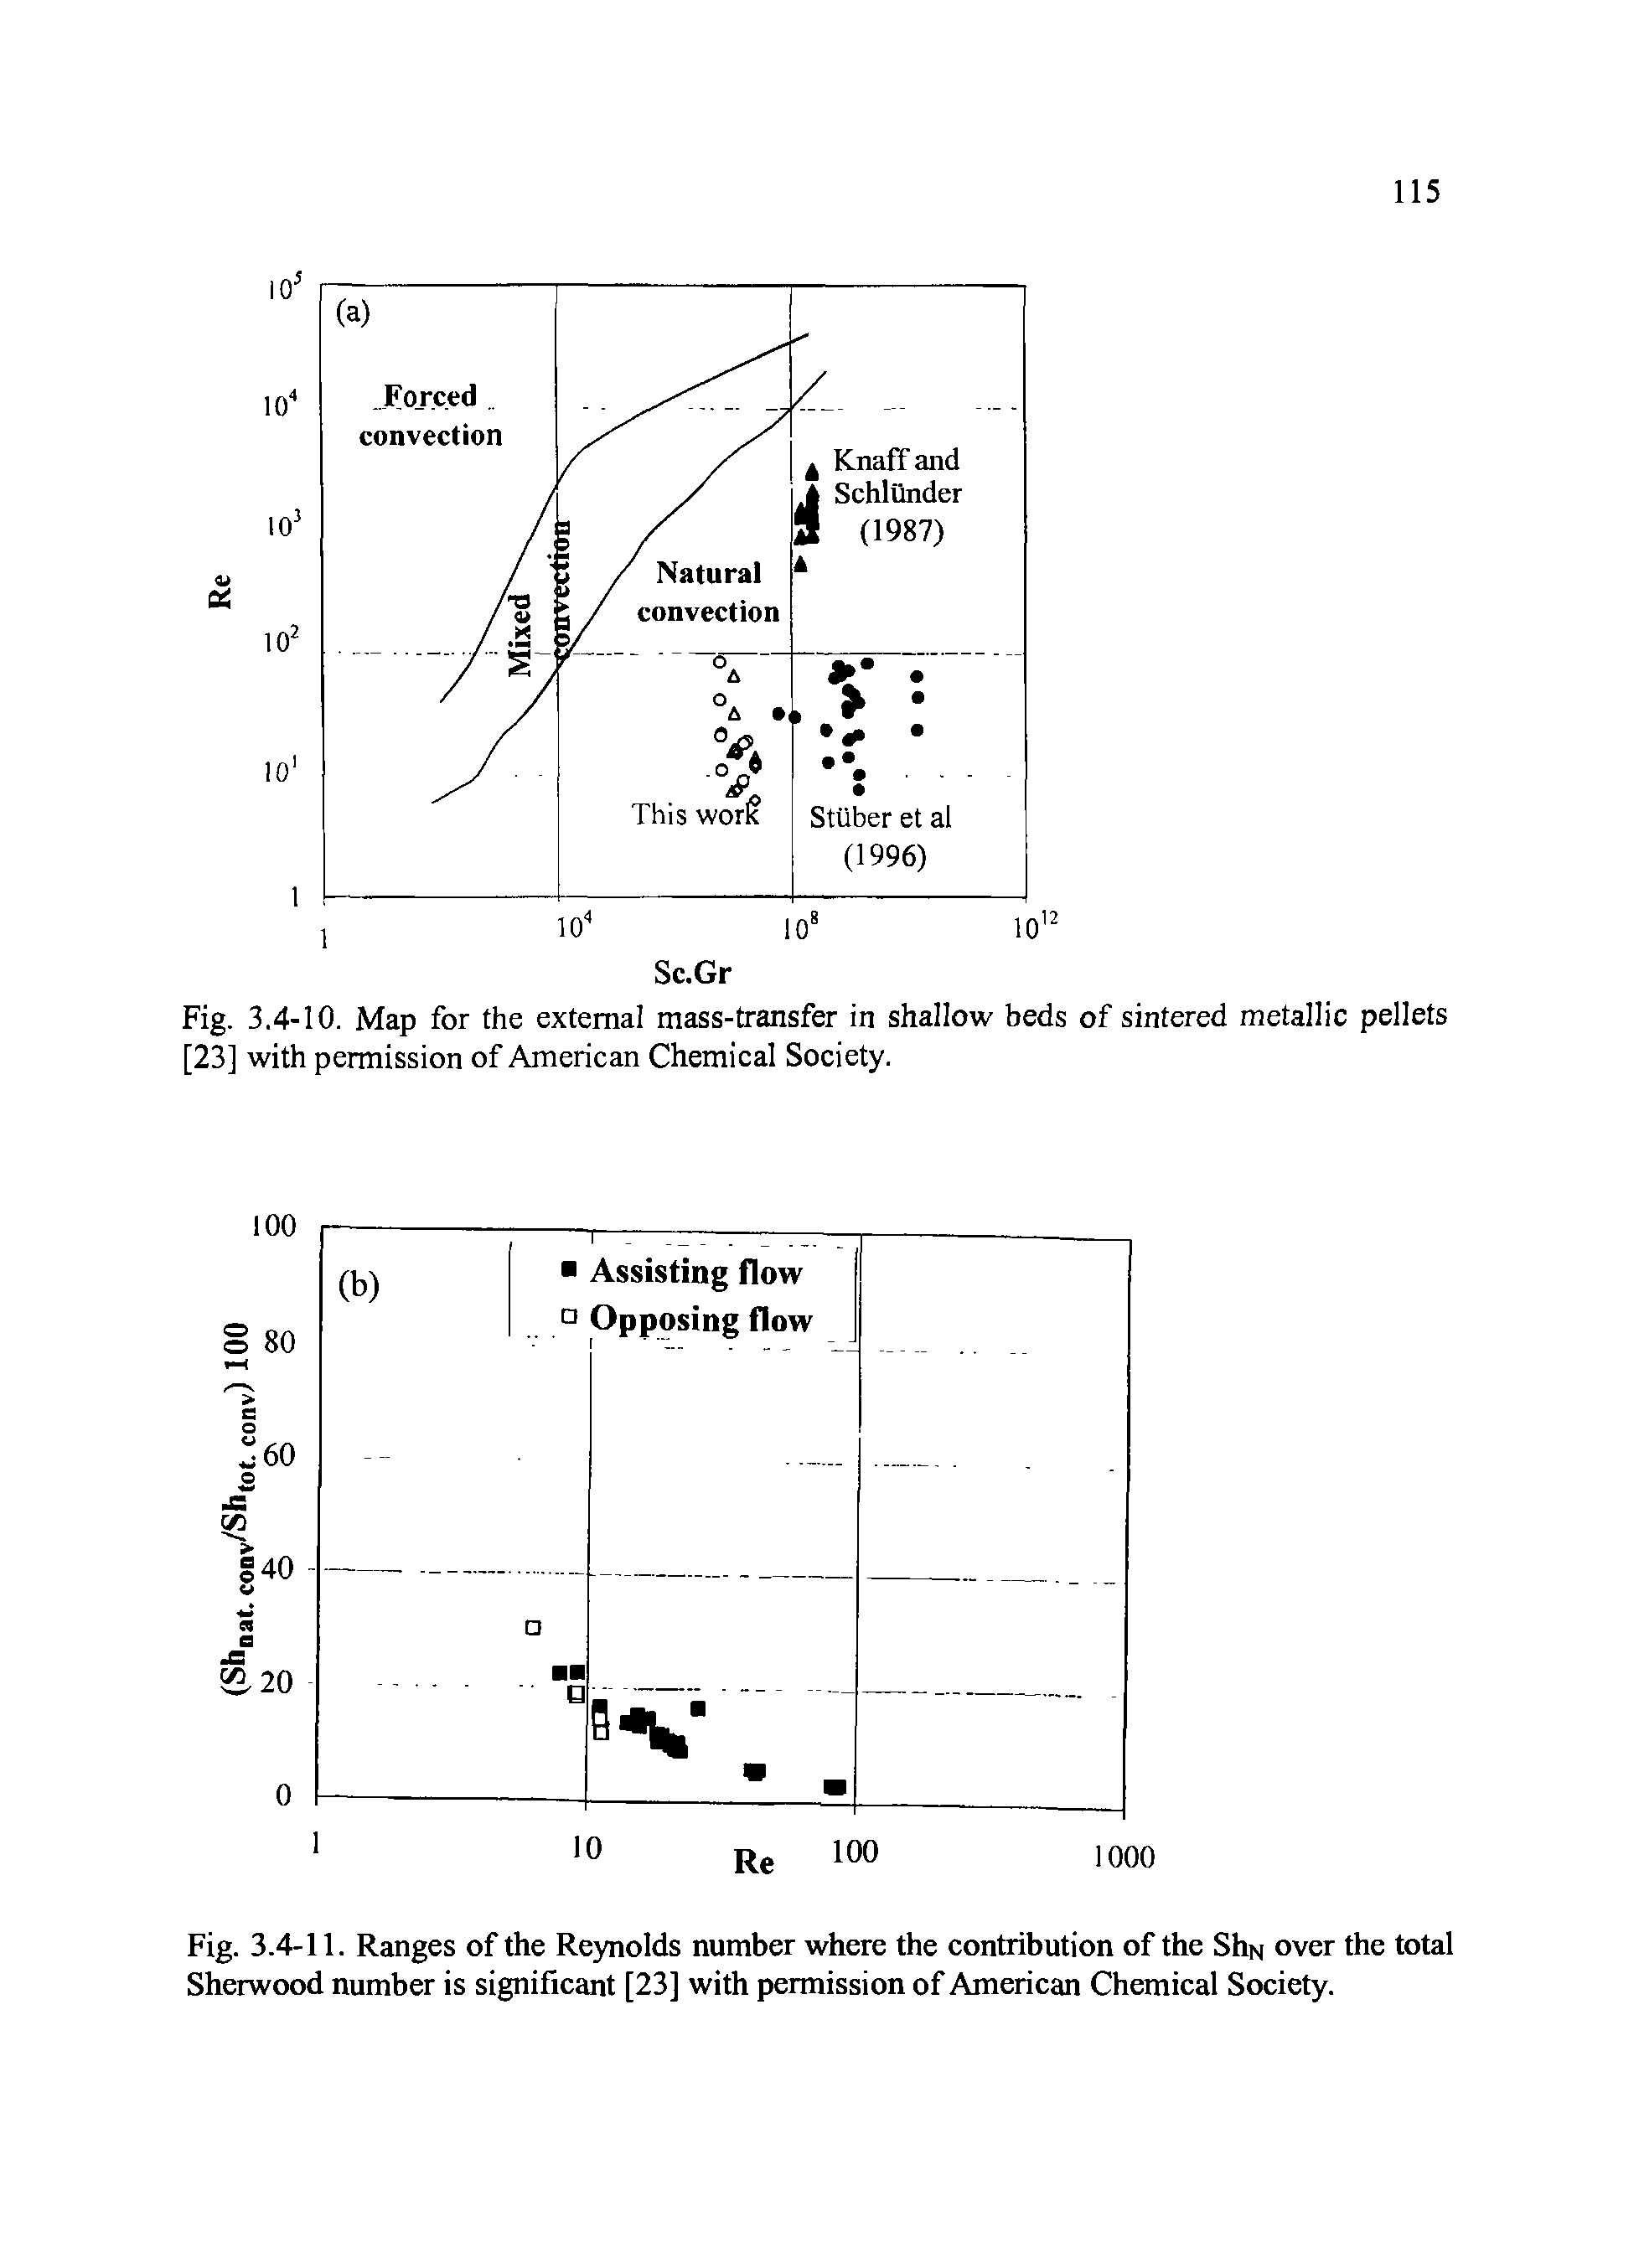 Fig. 3.4-10. Map for the external mass-transfer in shallow beds of sintered metallic pellets [23] with permission of American Chemical Society.